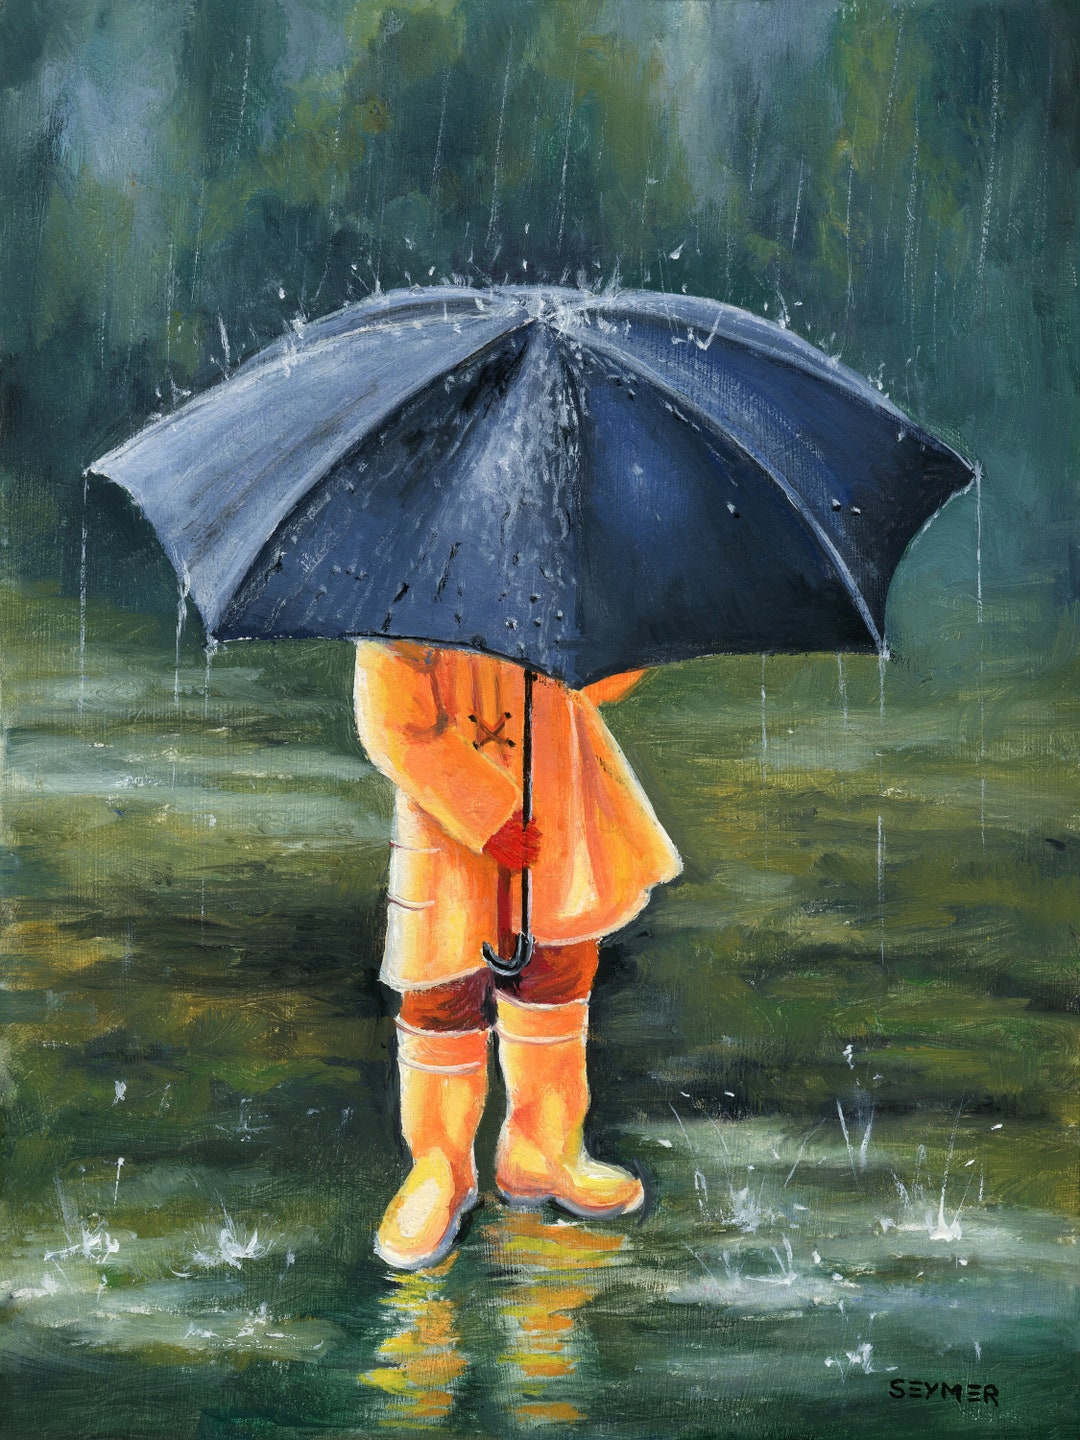 Buy Boy With Umbrella ORIGINAL Painting Rainy Day Artwork Little Online in  India Etsy